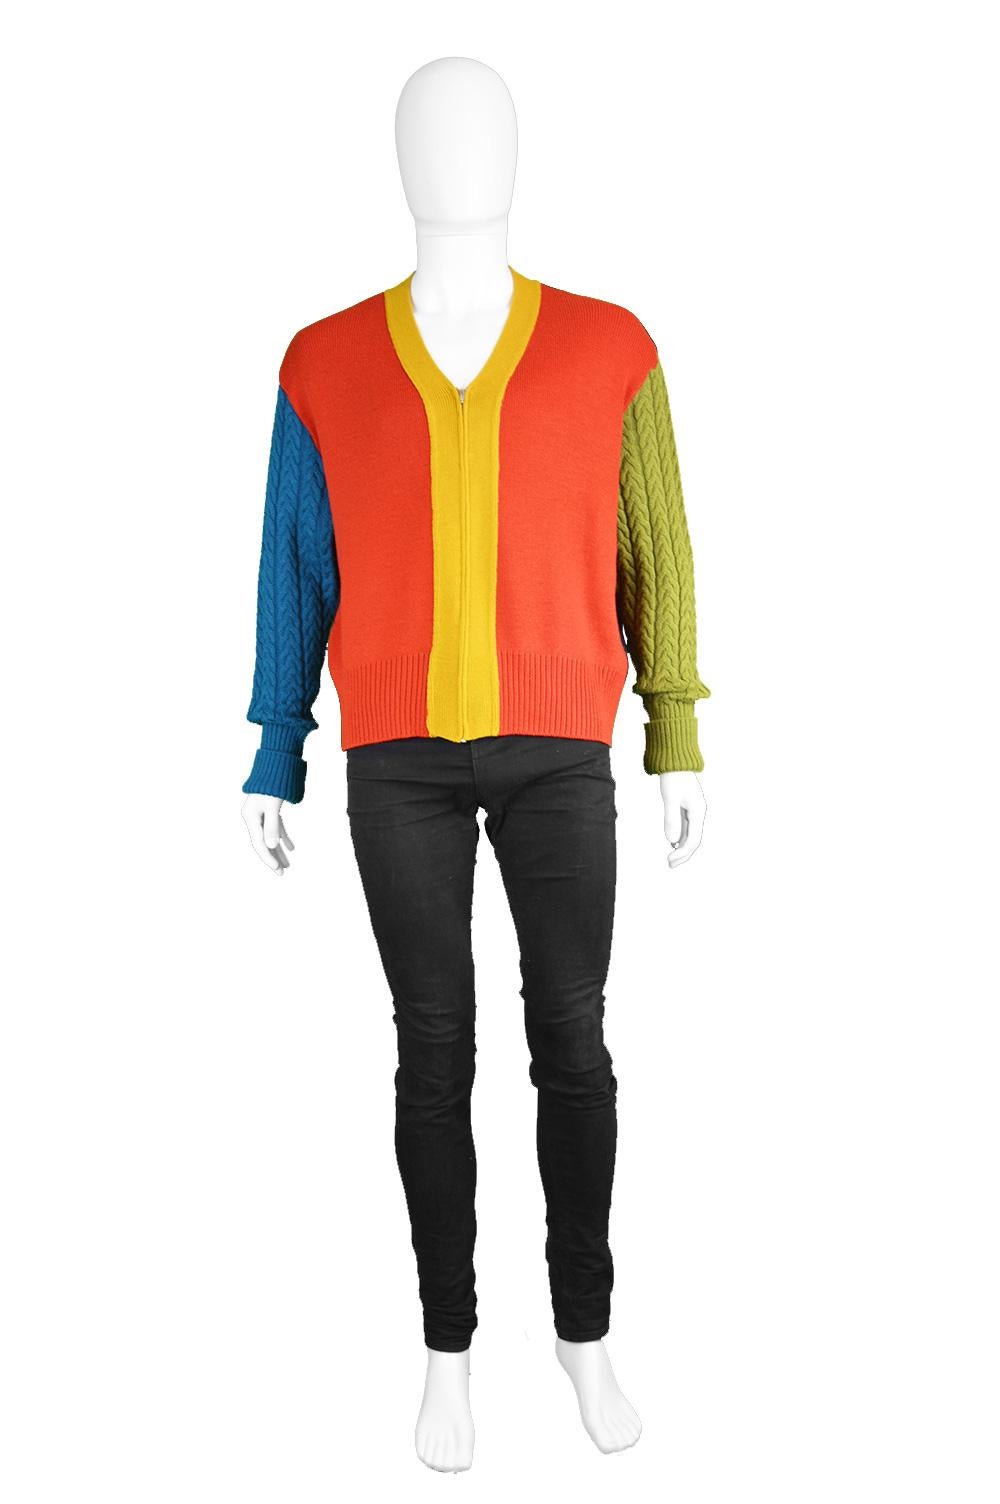 Jean Paul Gaultier Men's Knitted Vintage Colour Blocked Zip Up Cardigan Sweater, 1990s

Size: Marked men's XL but this gives a loose fit, like most cardigans and would look good oversized on a Medium to Large. 
Chest (actual measurement) - Up to 54”